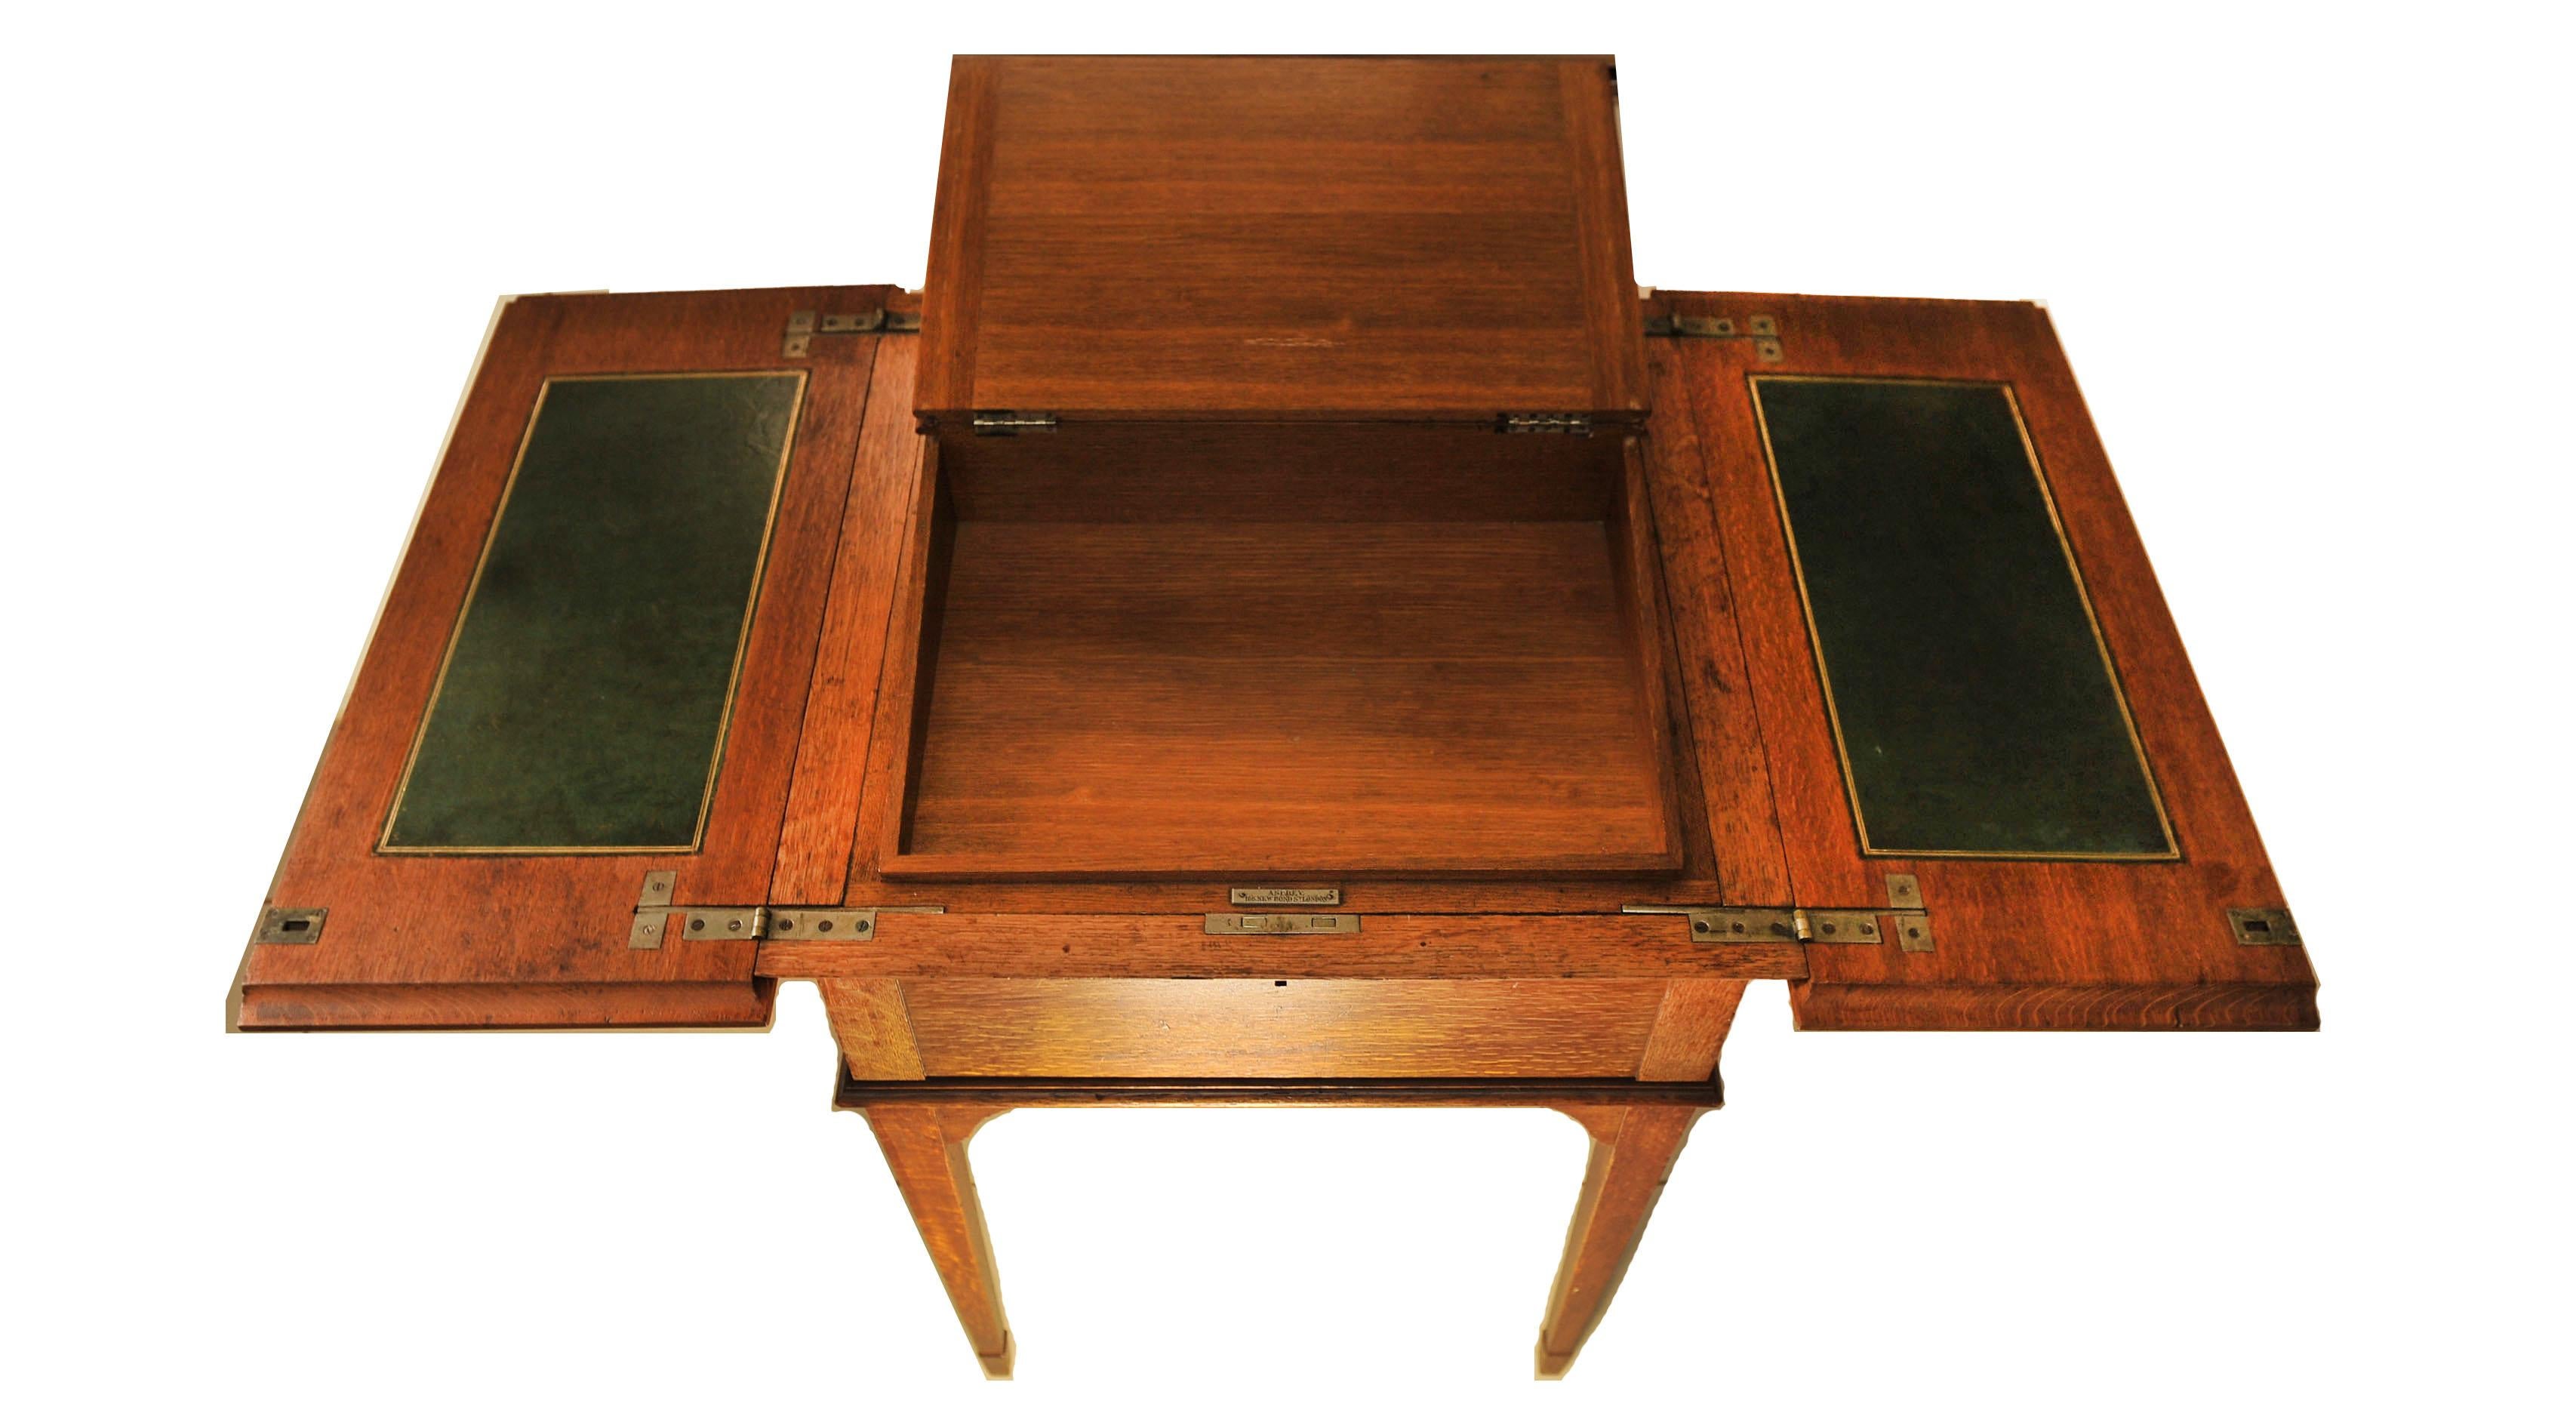 Asprey & Co. London Oak & Tooled Racing Green Leather Pop-Up Writing Desk 1920s For Sale 2